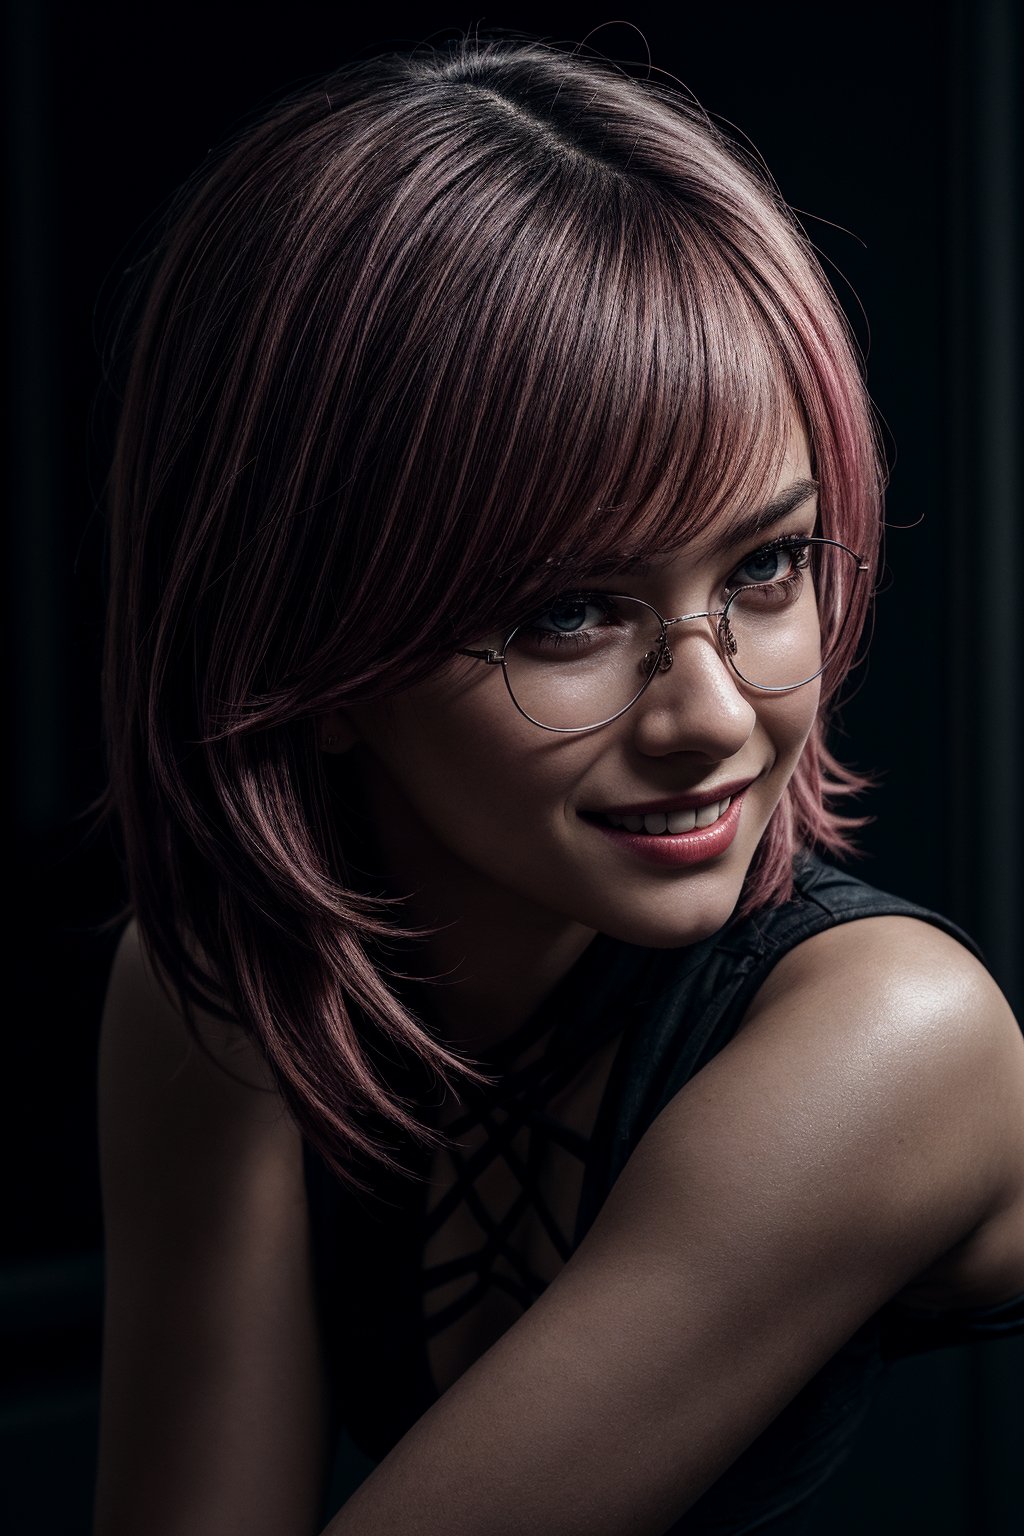 (Realistic),masterpiece,best quality,cinematic lighting,natural shadow,looking at viewer,Worm's Eye View,edgCorset,1girl,photo of a cute girl,full body,light smile,charming,20yo,glasses,Side-swept bangs Hair.Hair between eyes,Hot pink hair,Lace-up,Inlay,Raw photo,8k,uhd,dslr,soft,lighting,high quality,film grain,hyperrealismus,hyperrealistic,Atmospheric,Realistic Skin Texture,realistic hair details,ultra quality,best quality,Hyper Realism,